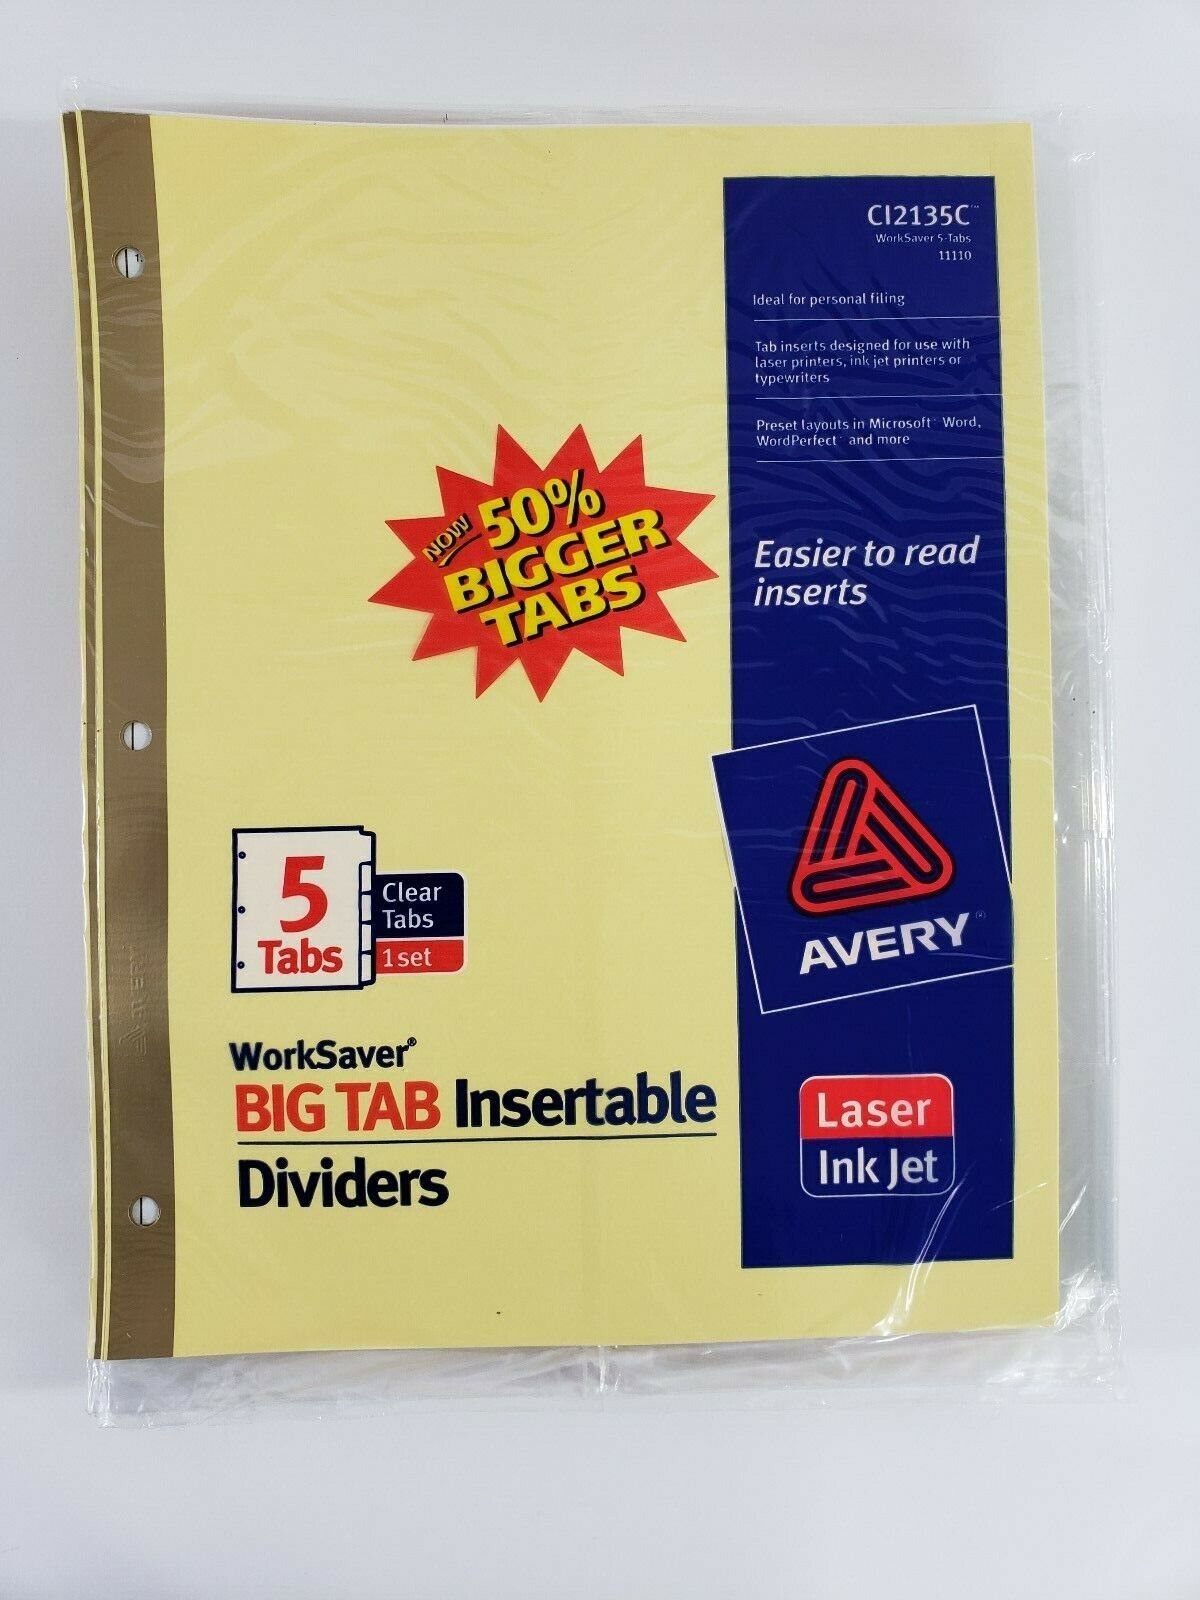 AVERY Worksaver Big Tab Insertable Divider Blank -8.50